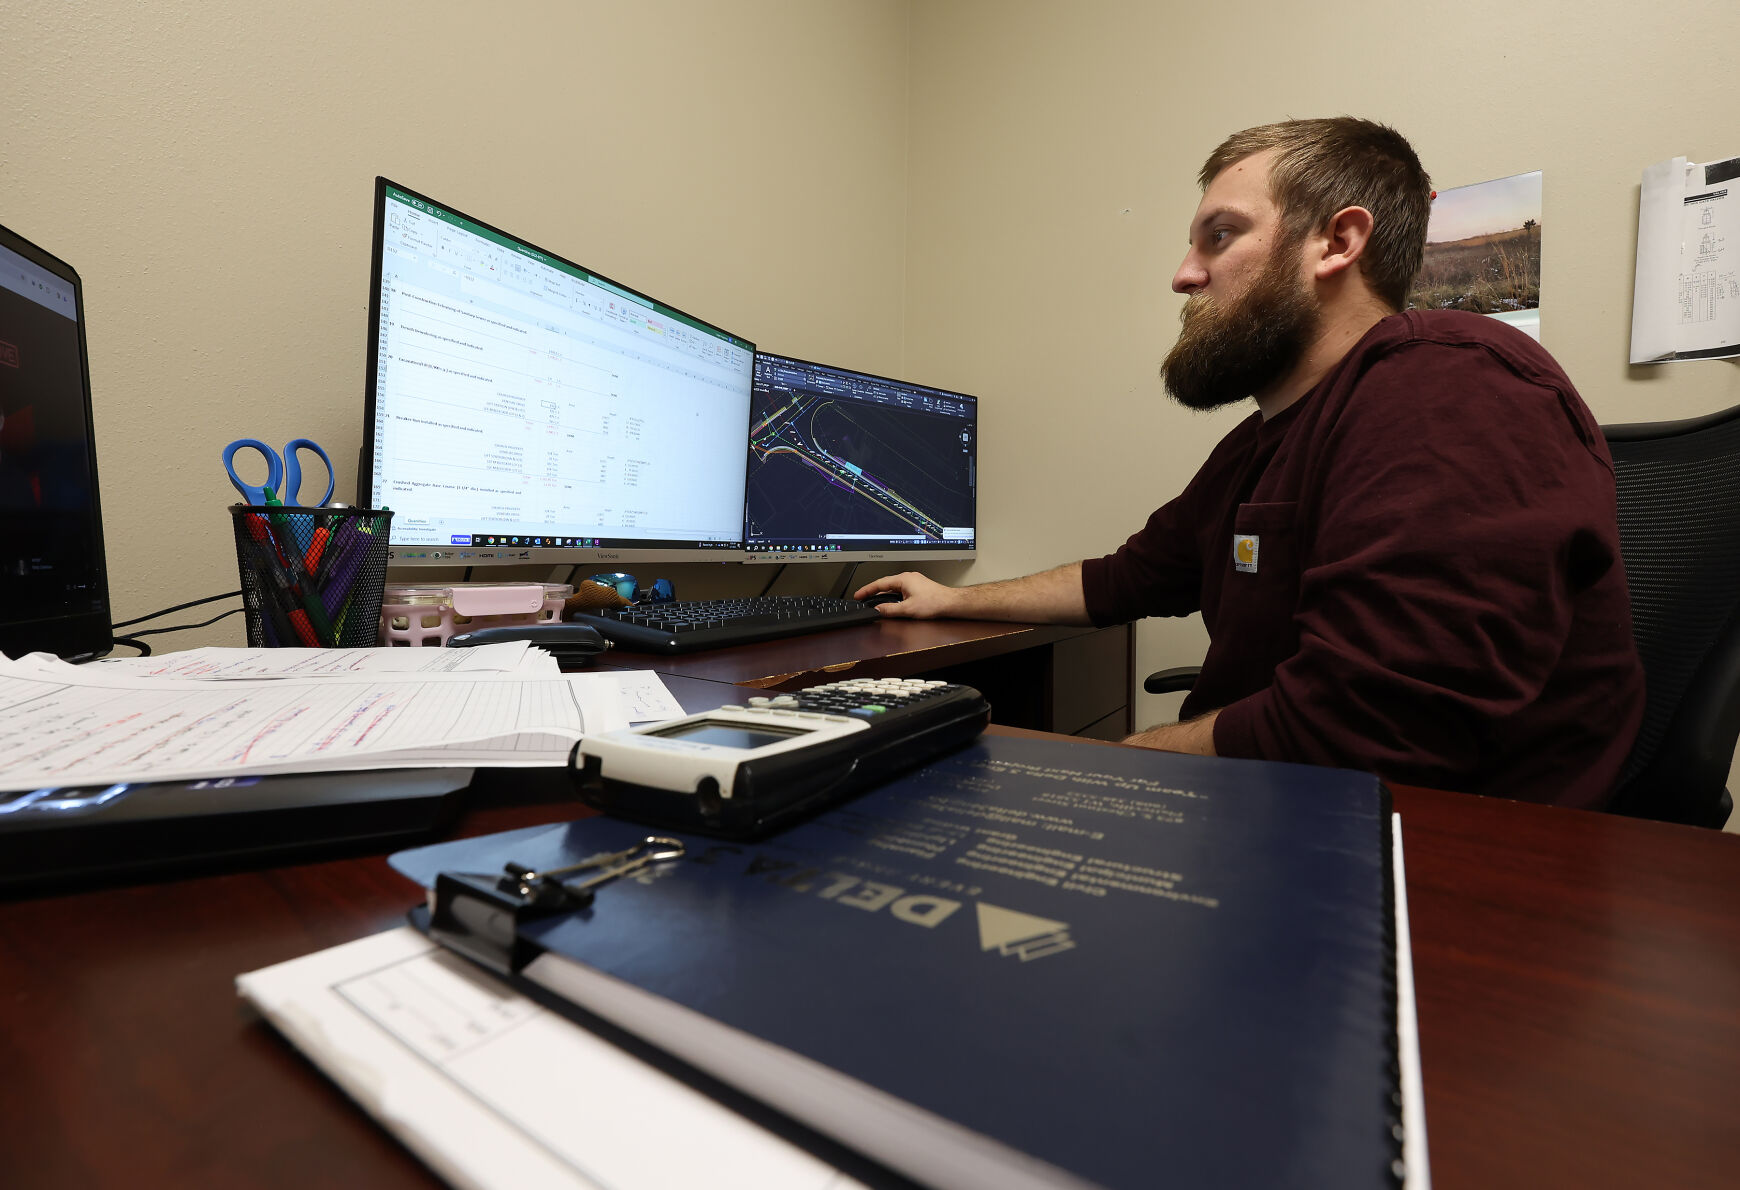 Delta 3 Engineering civil environmental engineer Logan Hoppman works on his computer at the Delta 3 office in Platteville, Wis. The company offers a variety of civil, environmental, wastewater and structural engineering services, as well surveying, grant writing and other services.    PHOTO CREDIT: Stephen Gassman
Telegraph Herald